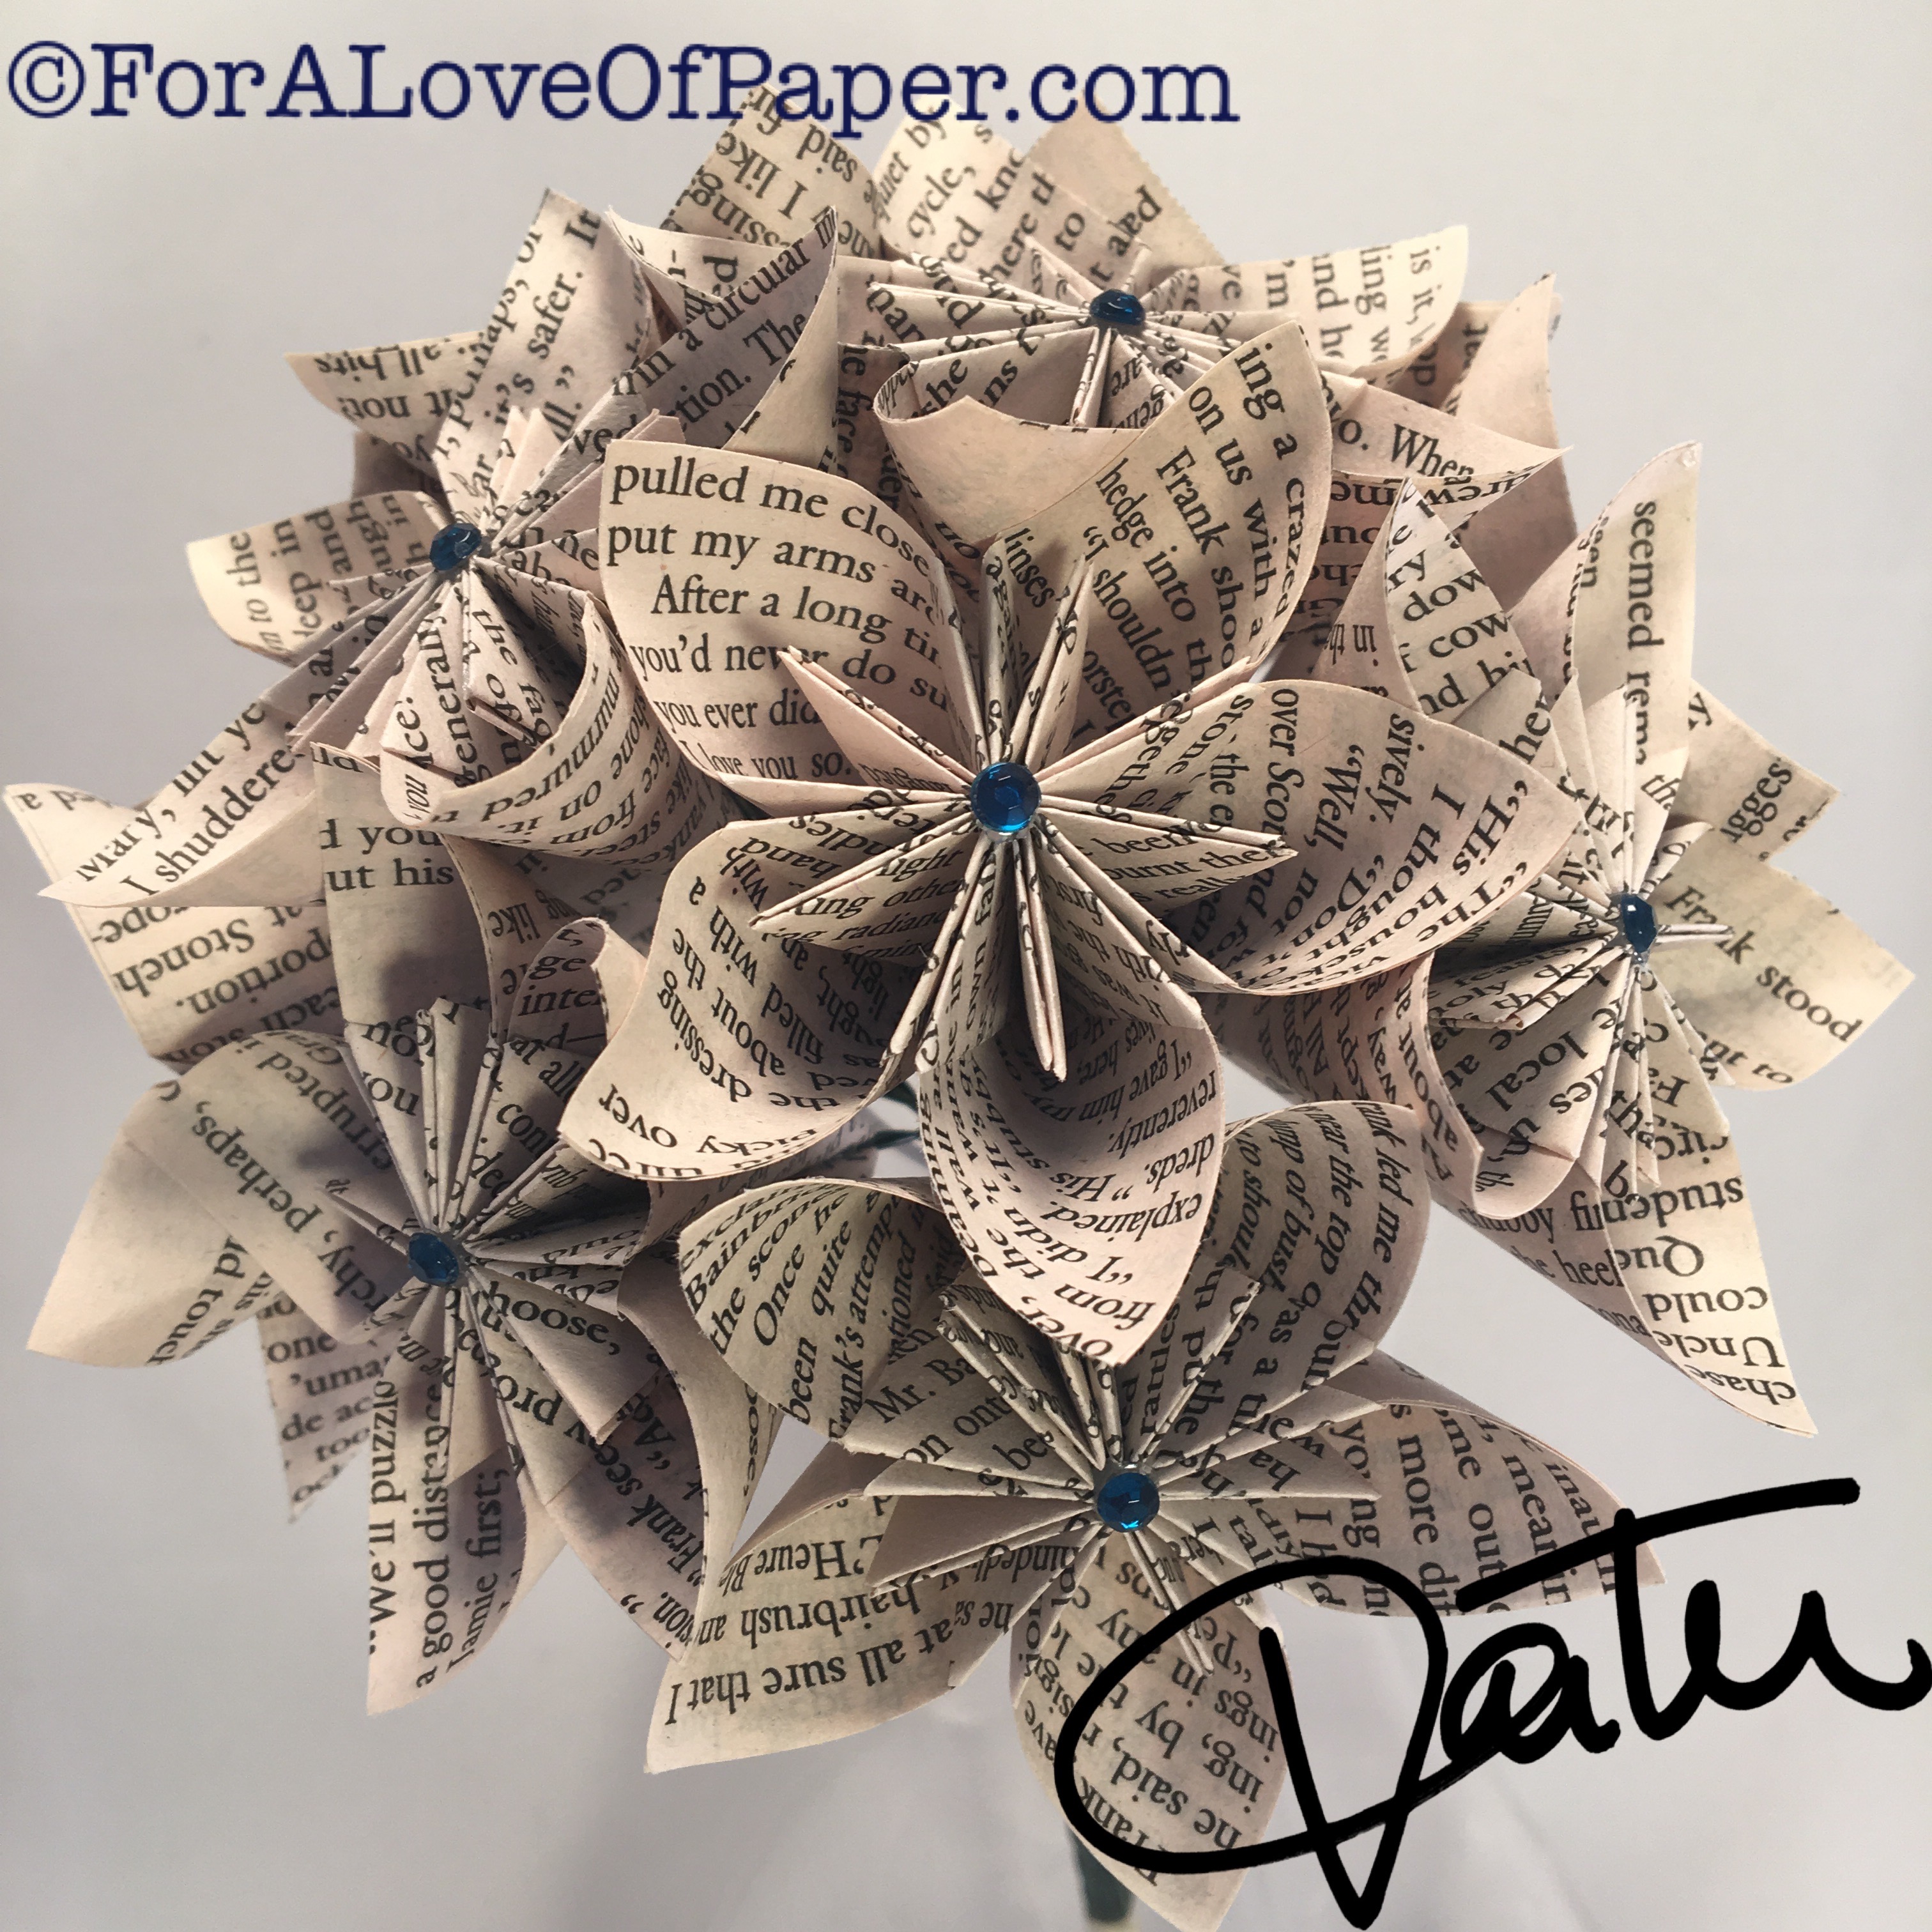 Paper flowers made from the book Outlander